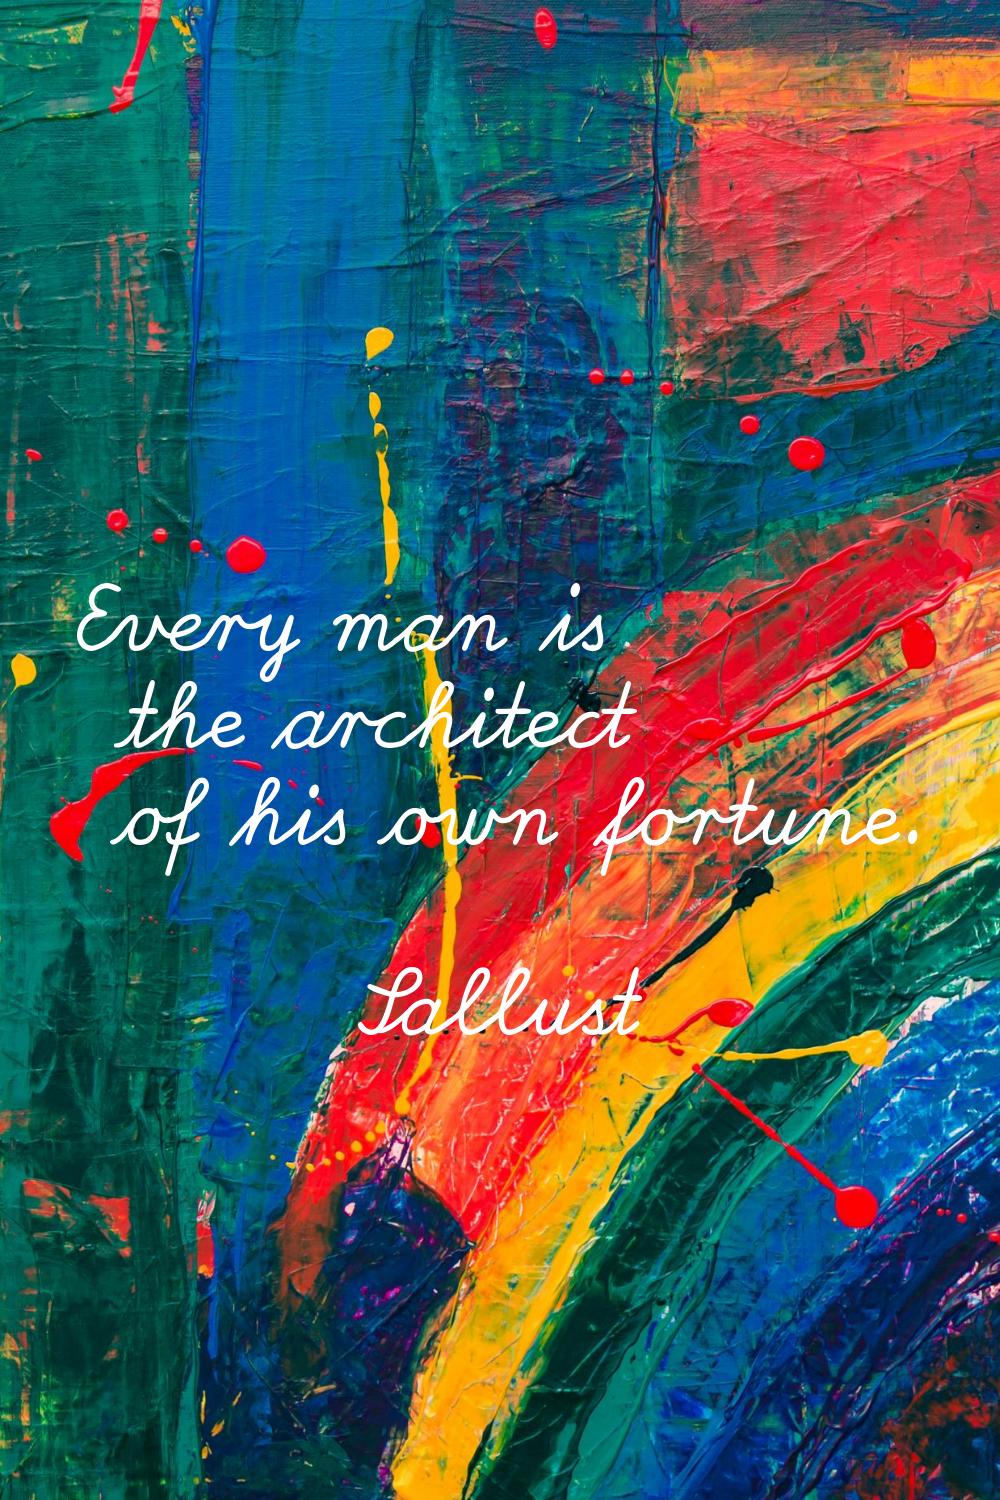 Every man is the architect of his own fortune.